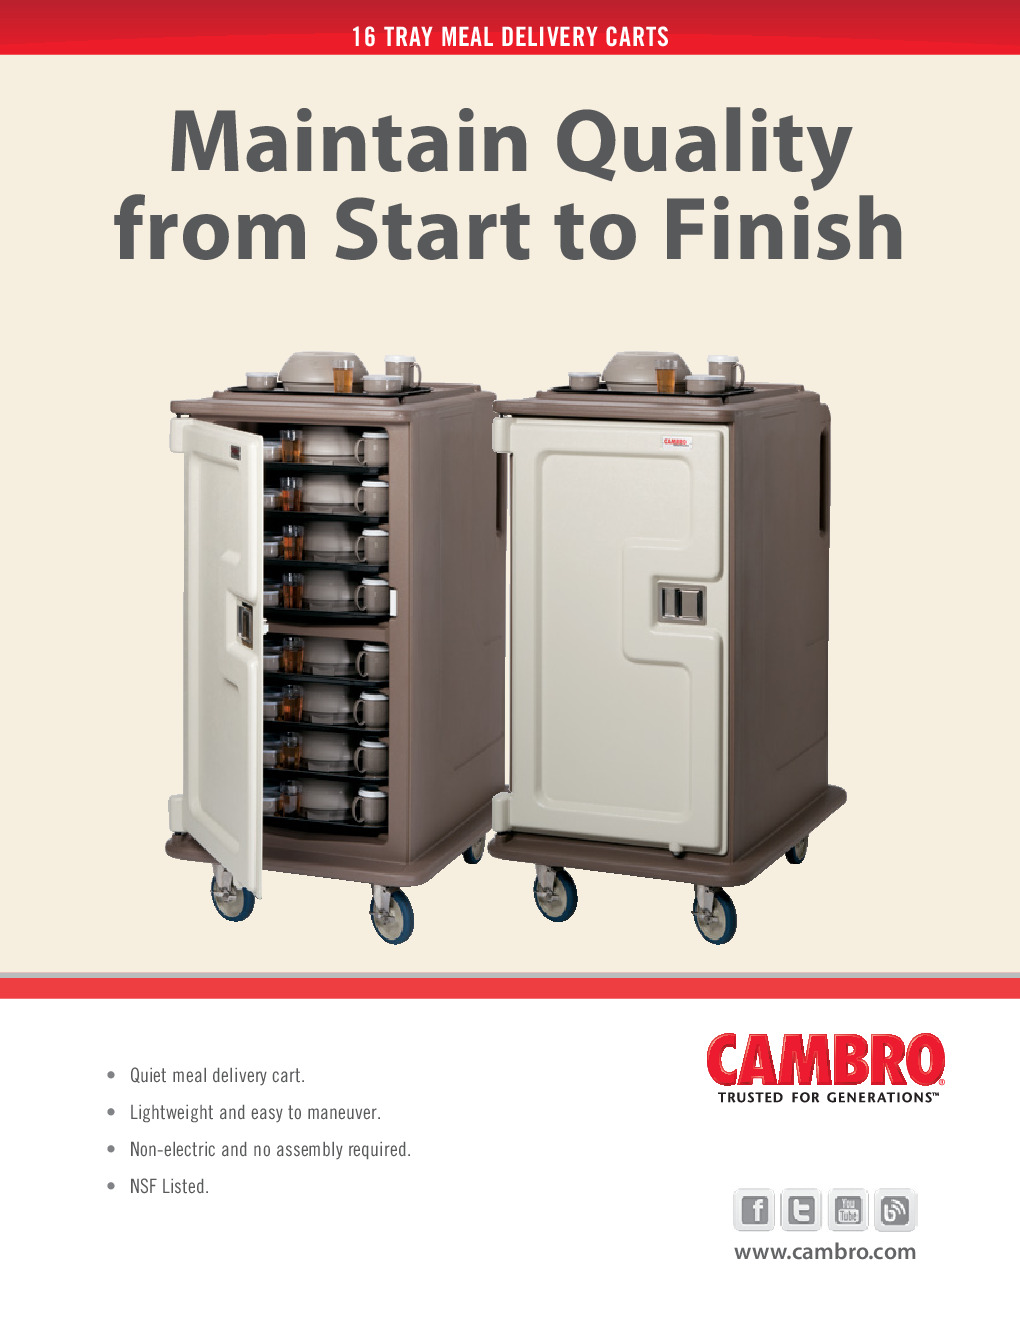 Cambro MDC1418T16401 Meal Tray Delivery Cabinet